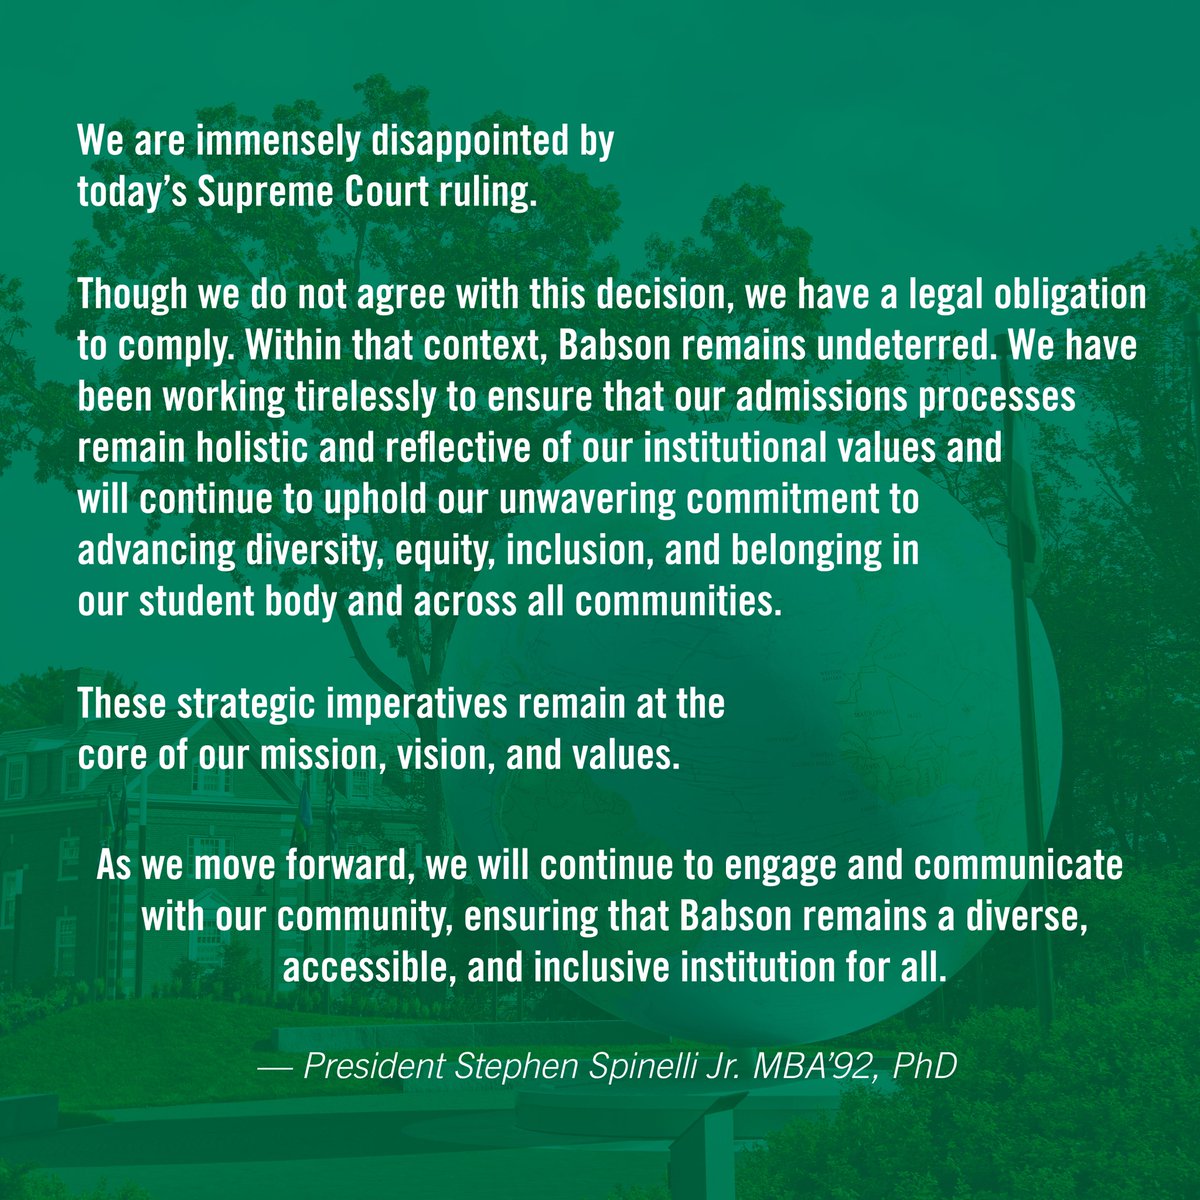 As we move forward, we will continue to engage and communicate with our community, ensuring that Babson remains a diverse, accessible, and inclusive institution for all. Read the full statement on the Supreme Court Ruling on Race-Conscious Admissions: babson.edu/about/our-lead…